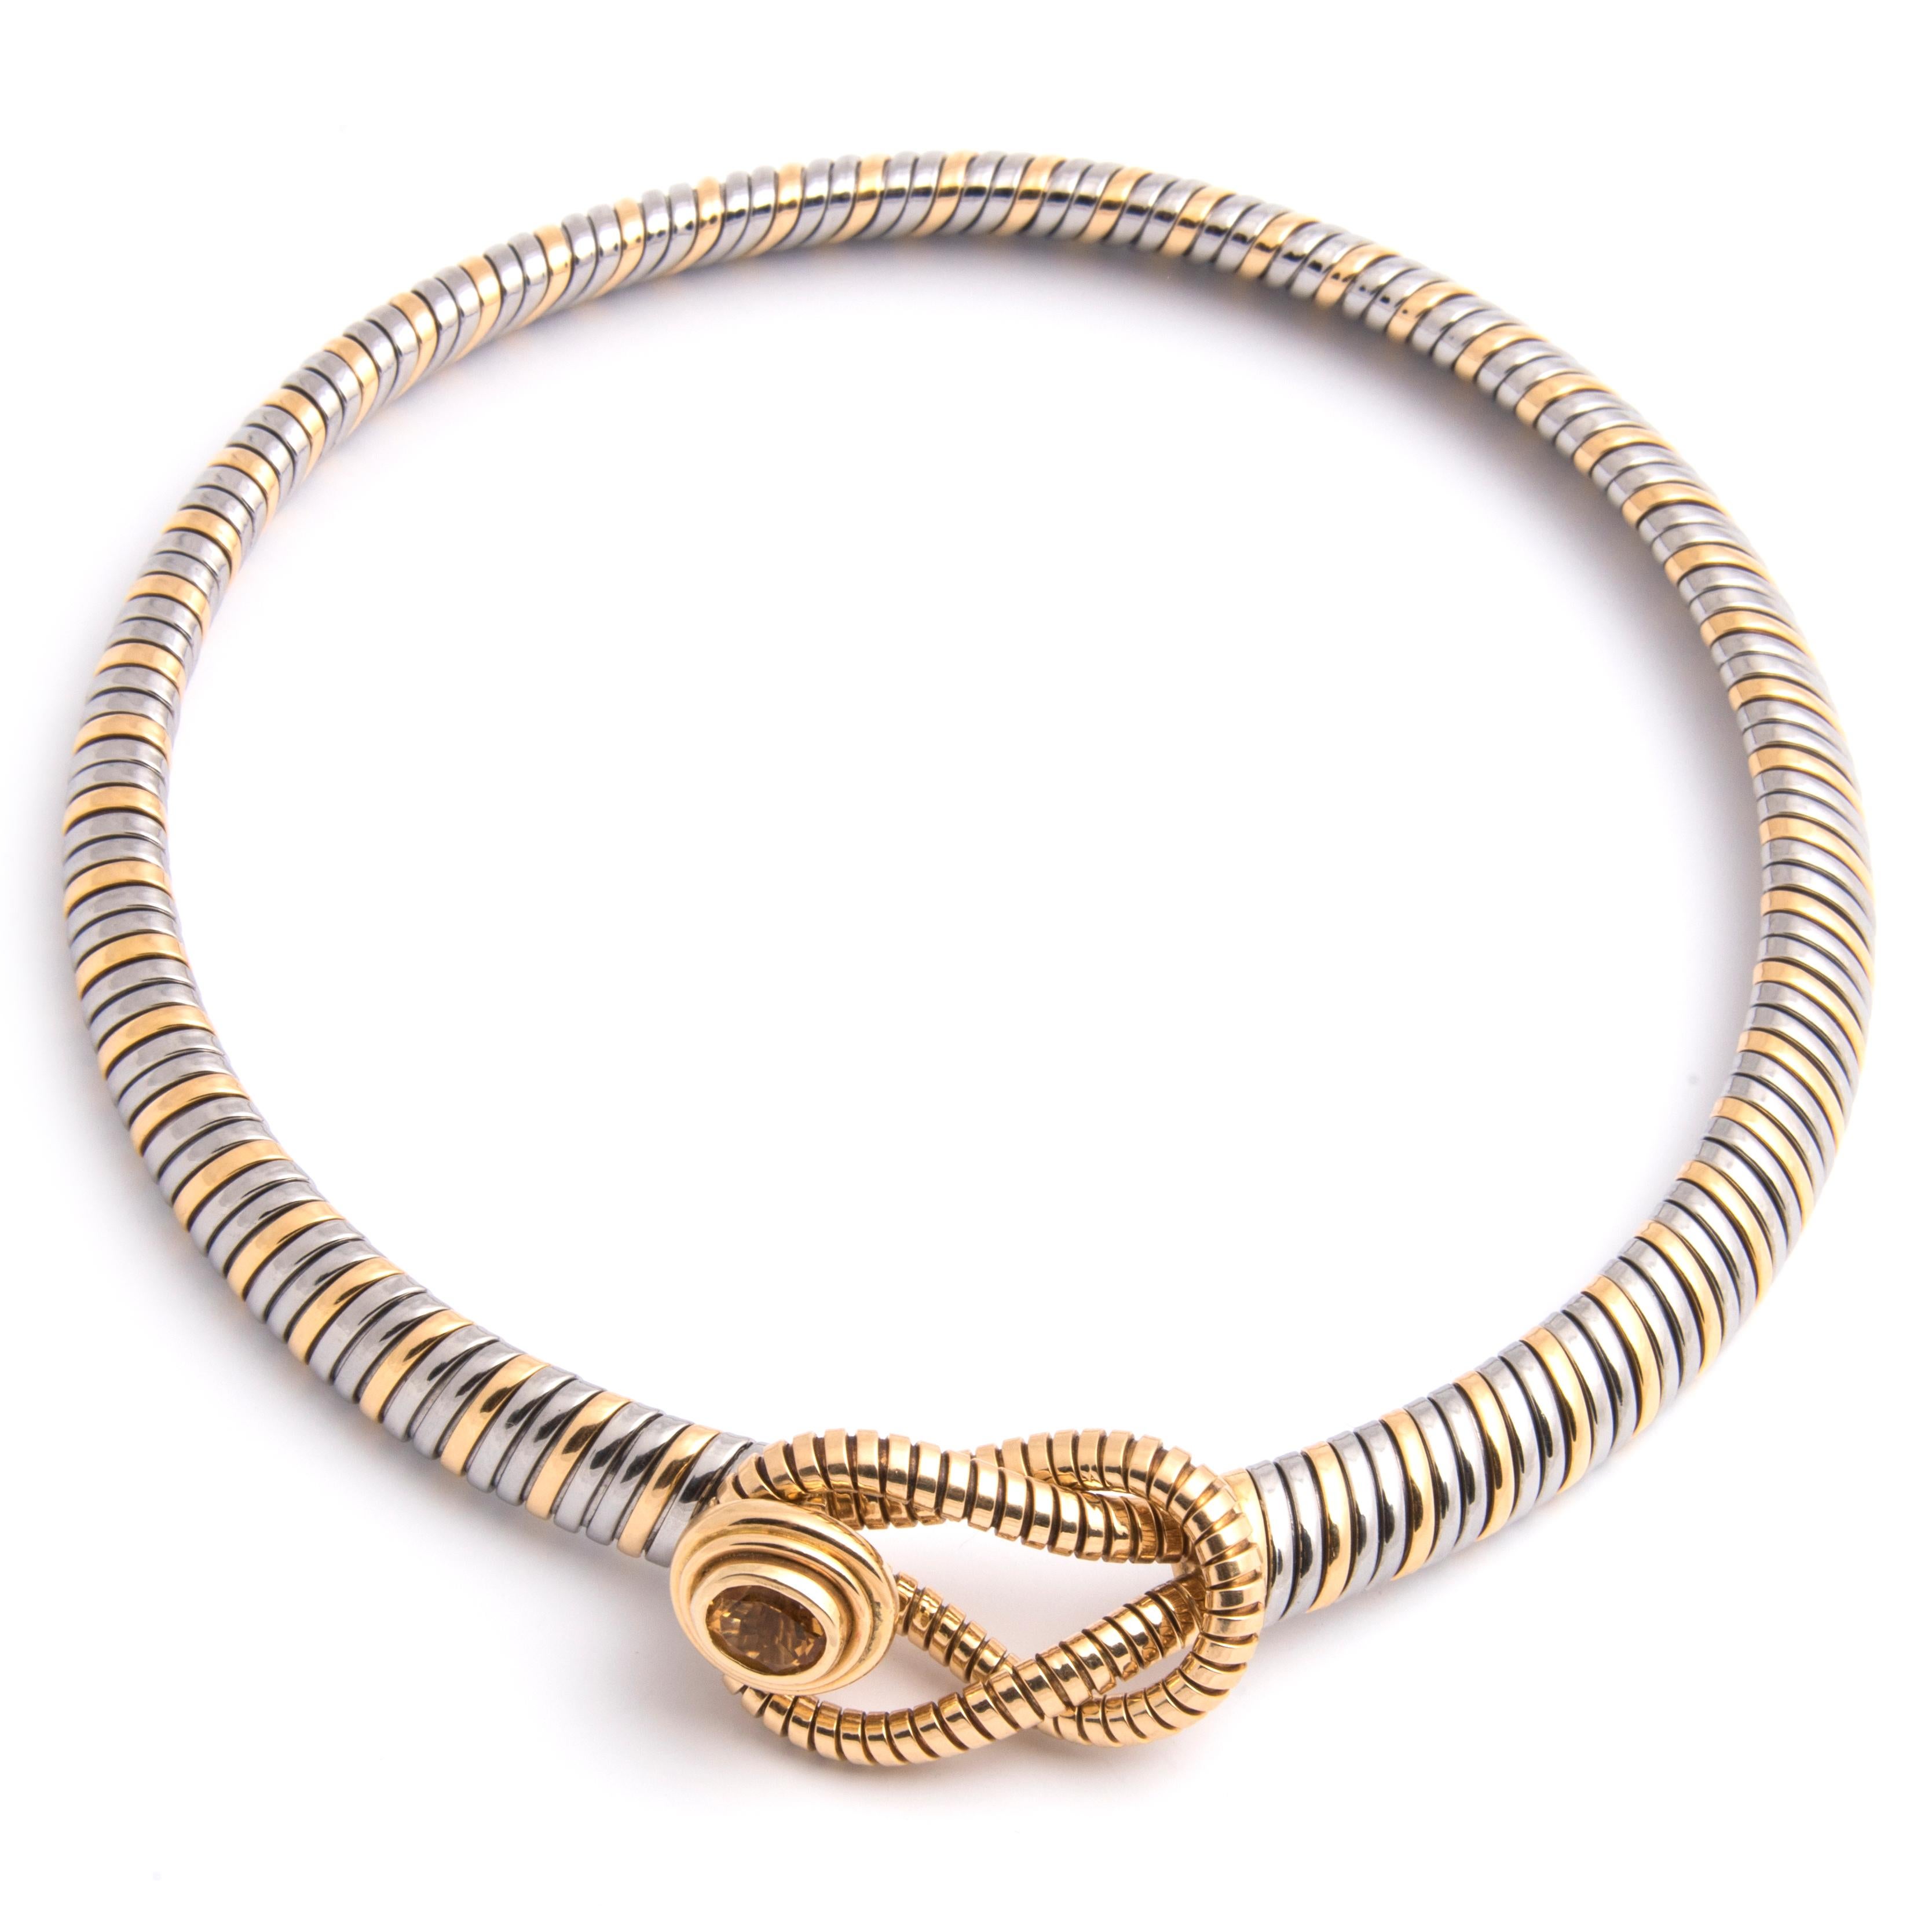 A Tubogaz chocker necklace by Cartier in 18k yellow gold and steel. The loops at each end forming a clasp with the button set with an oval citrine
Signed Cartier, stamped Or et Acier (Gold and steel), maker's mark, French import marks and numbered